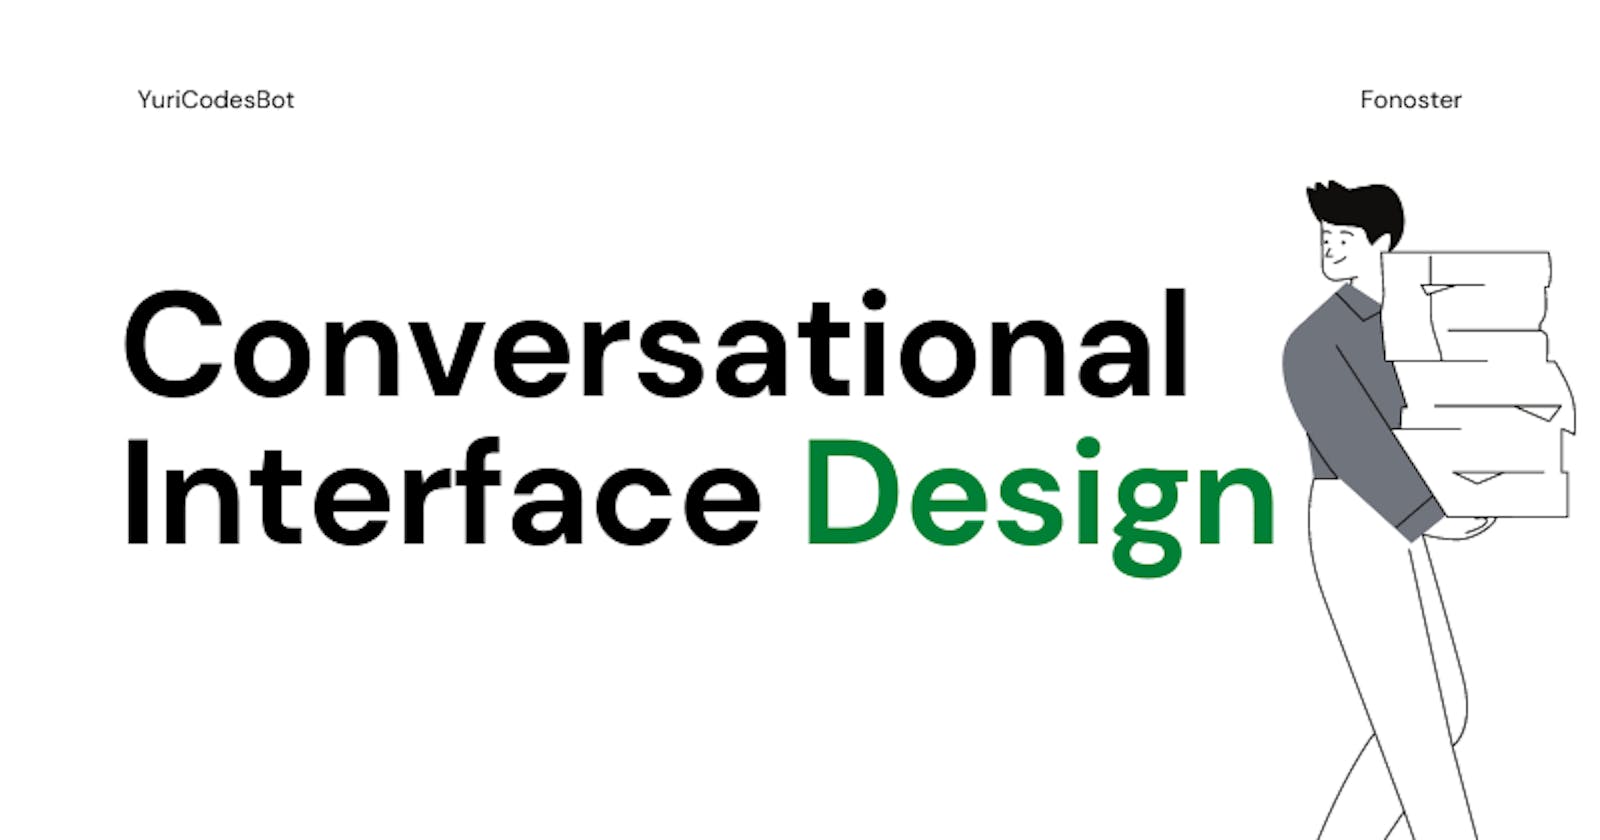 Steps for building conversational interfaces